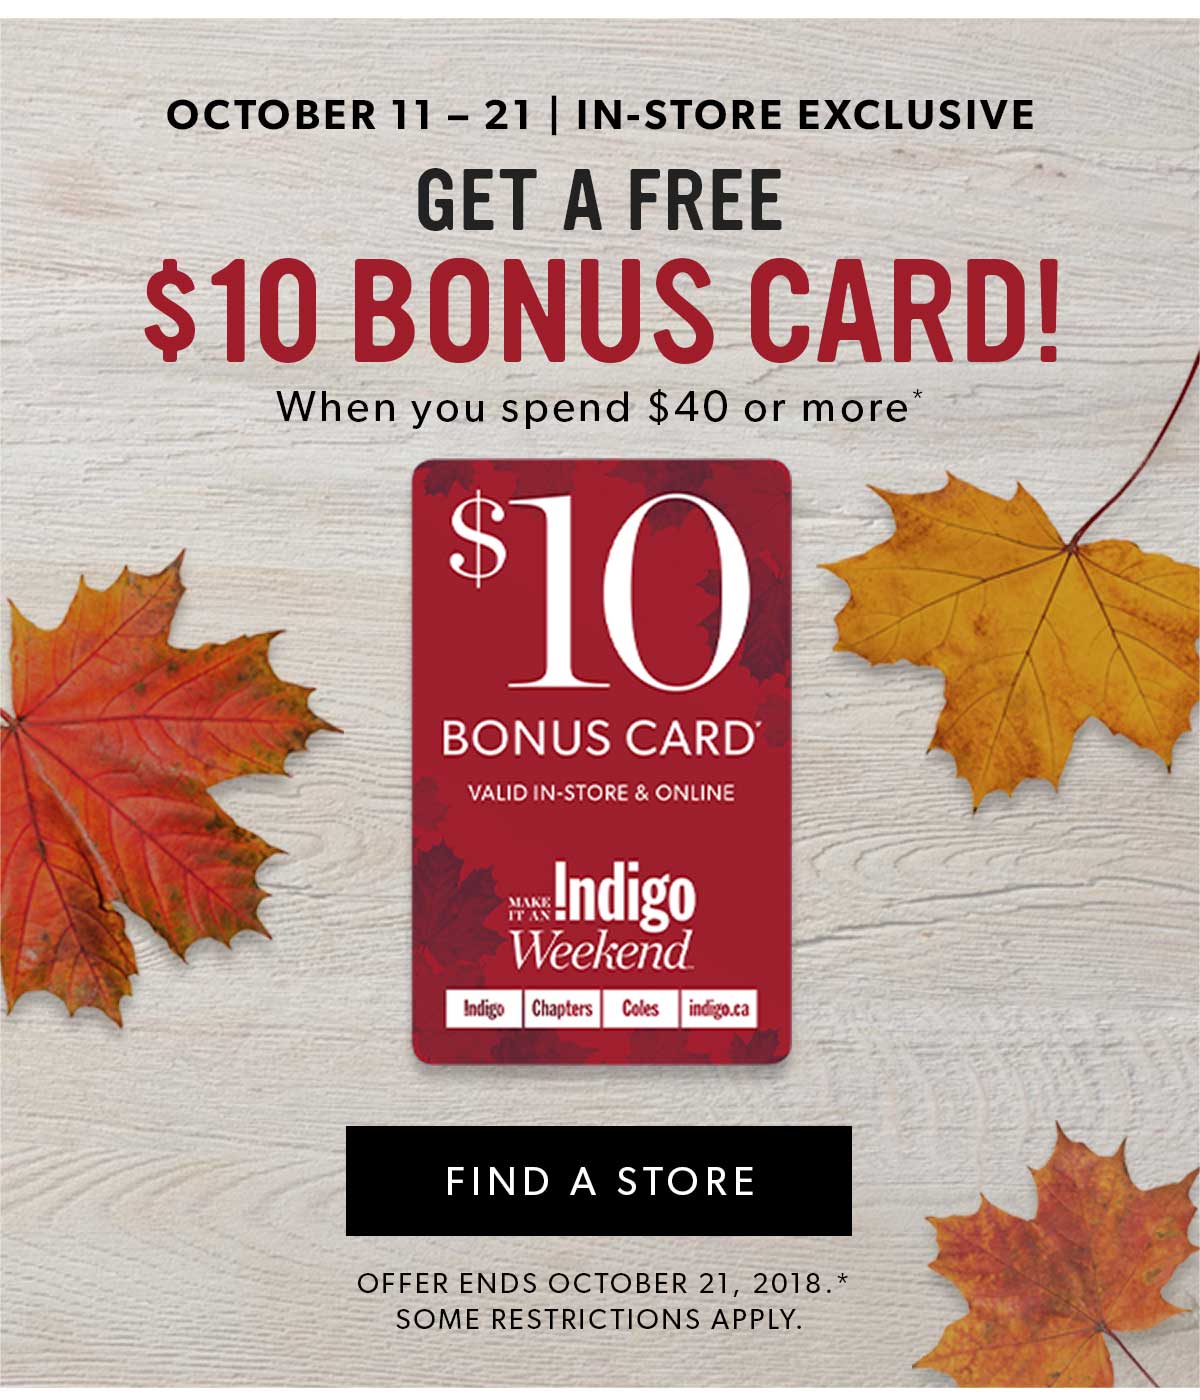 Get a Free $10 Bonus Card When you spend $40 or more*